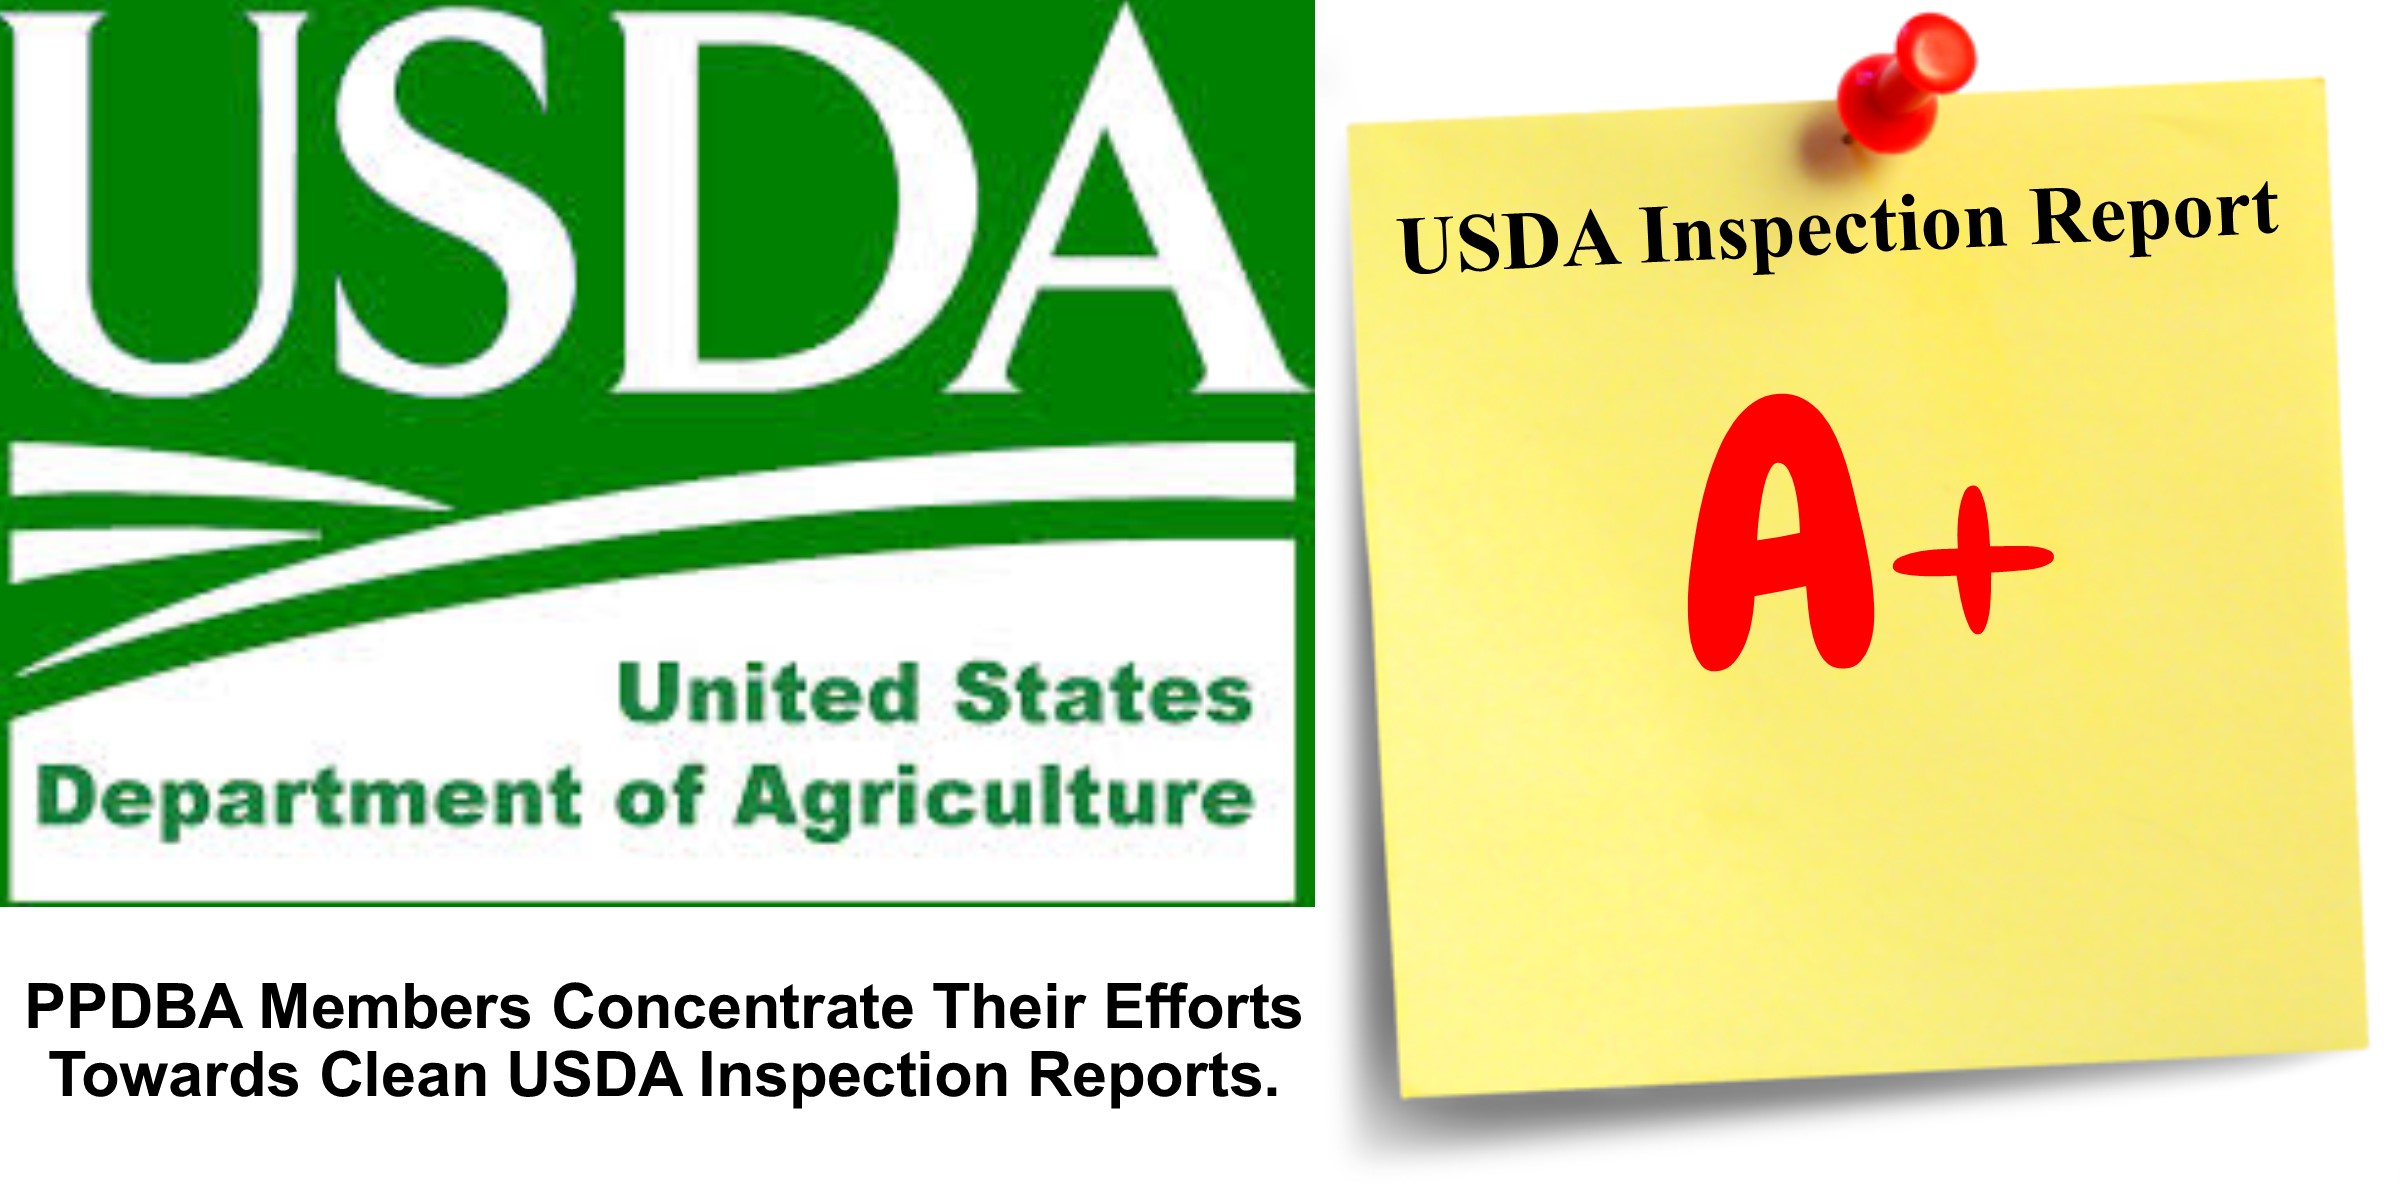 PPDBA Members Strive For Clean USDA Inspection Reports